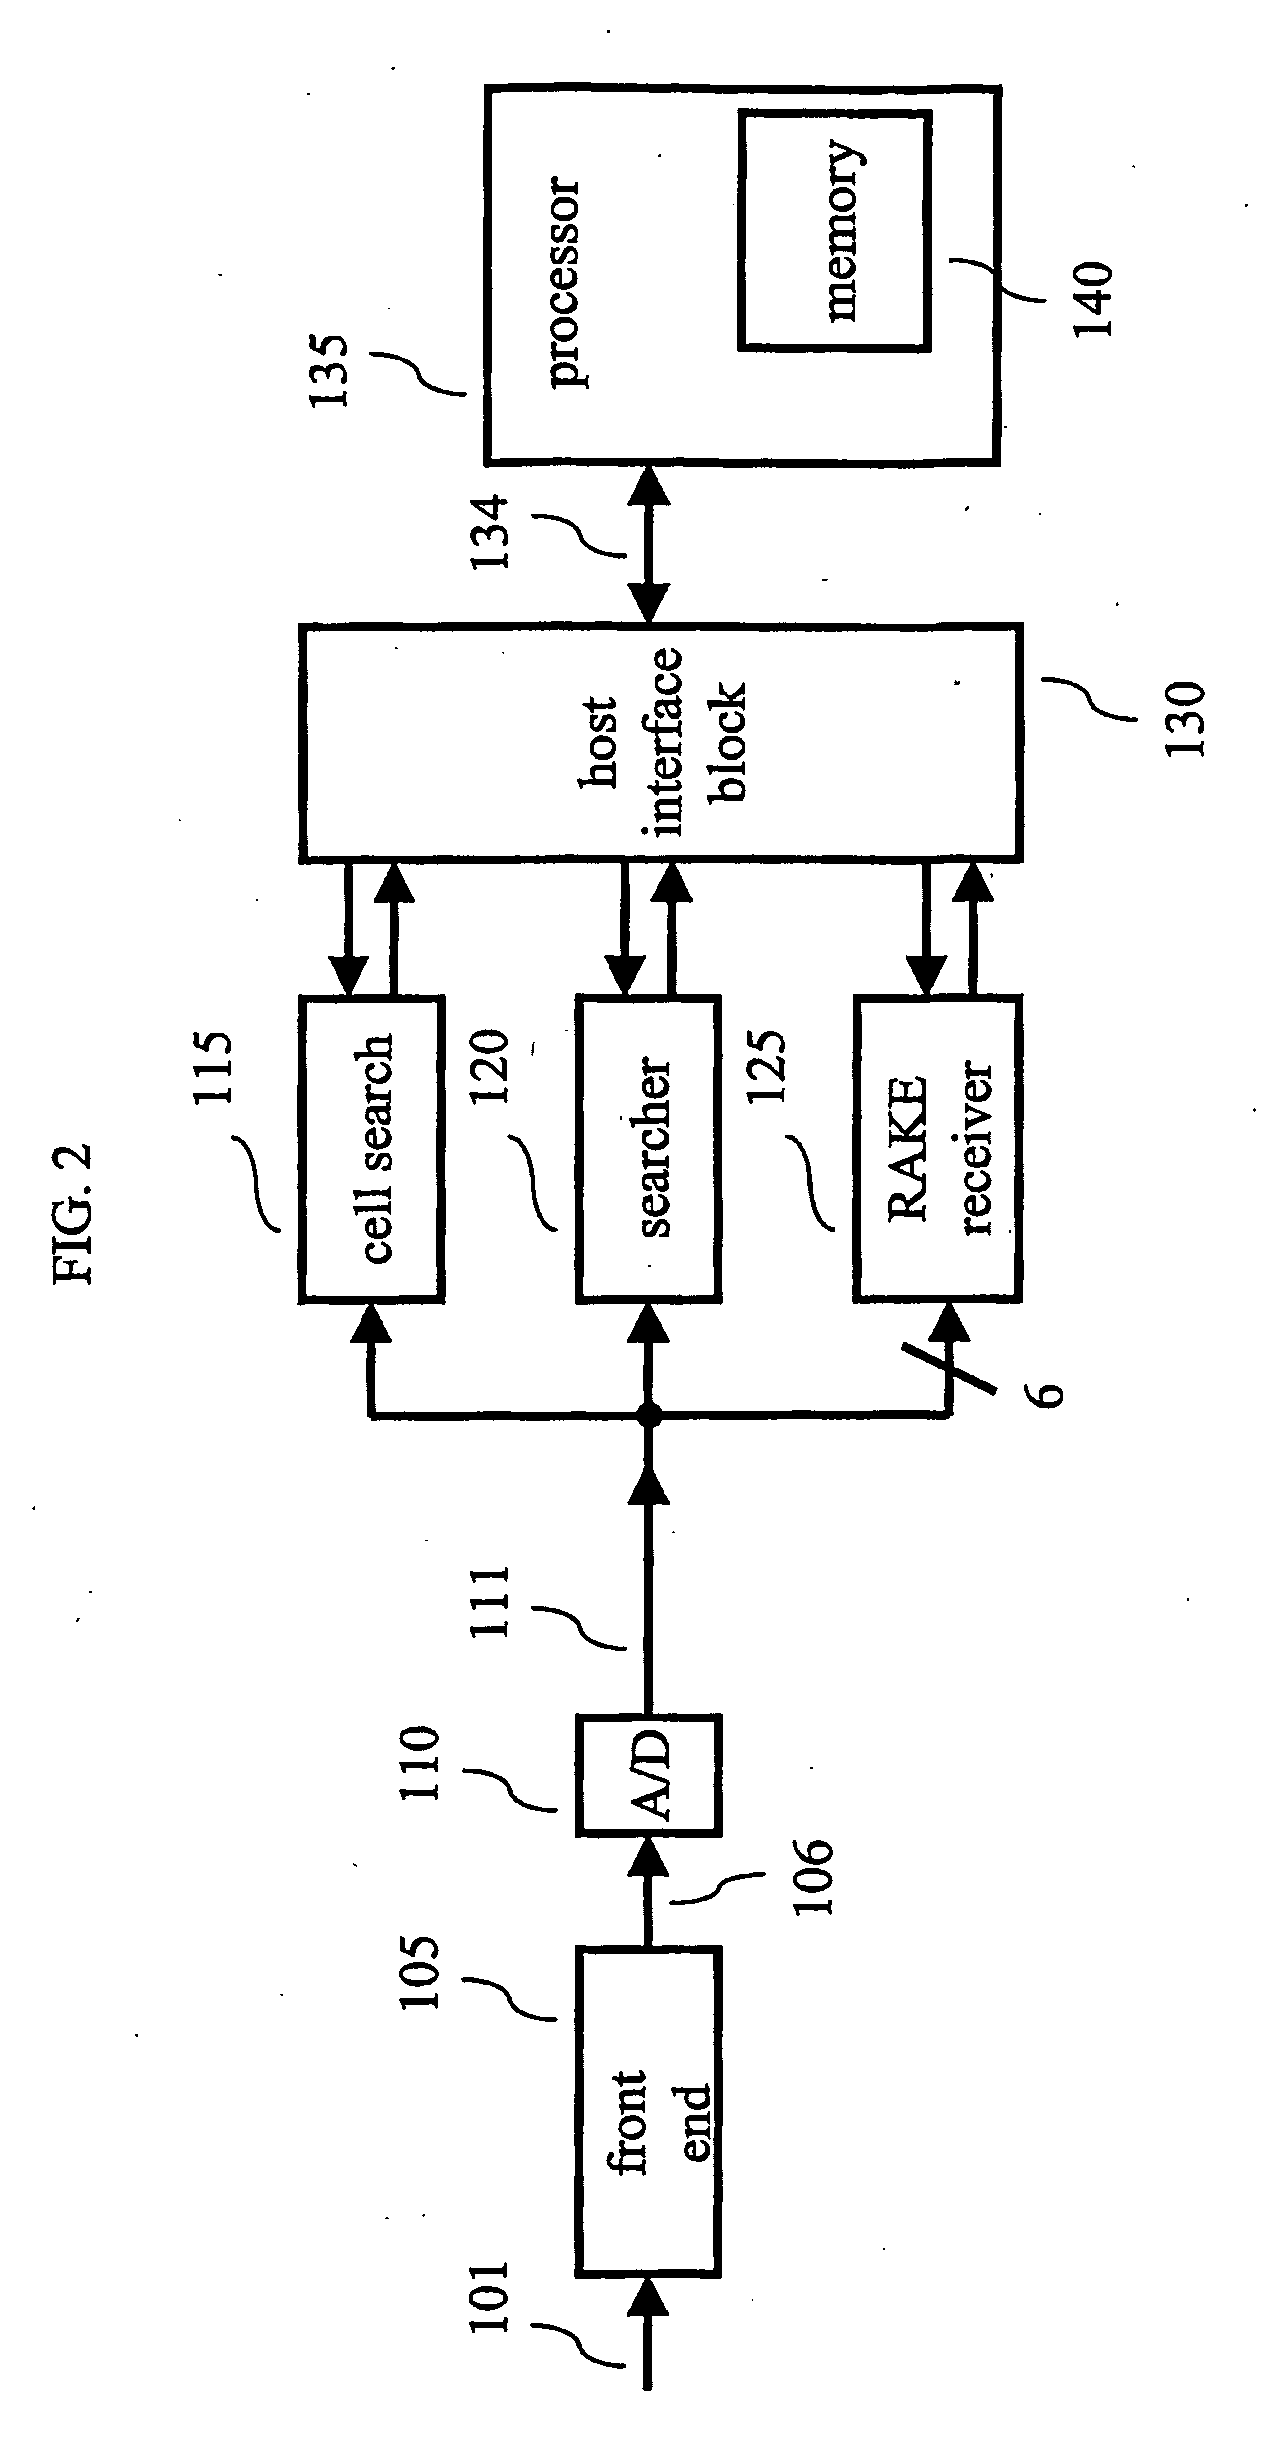 Adaptive Frame Synchronization in a Universal Mobile Telephone System Receiver